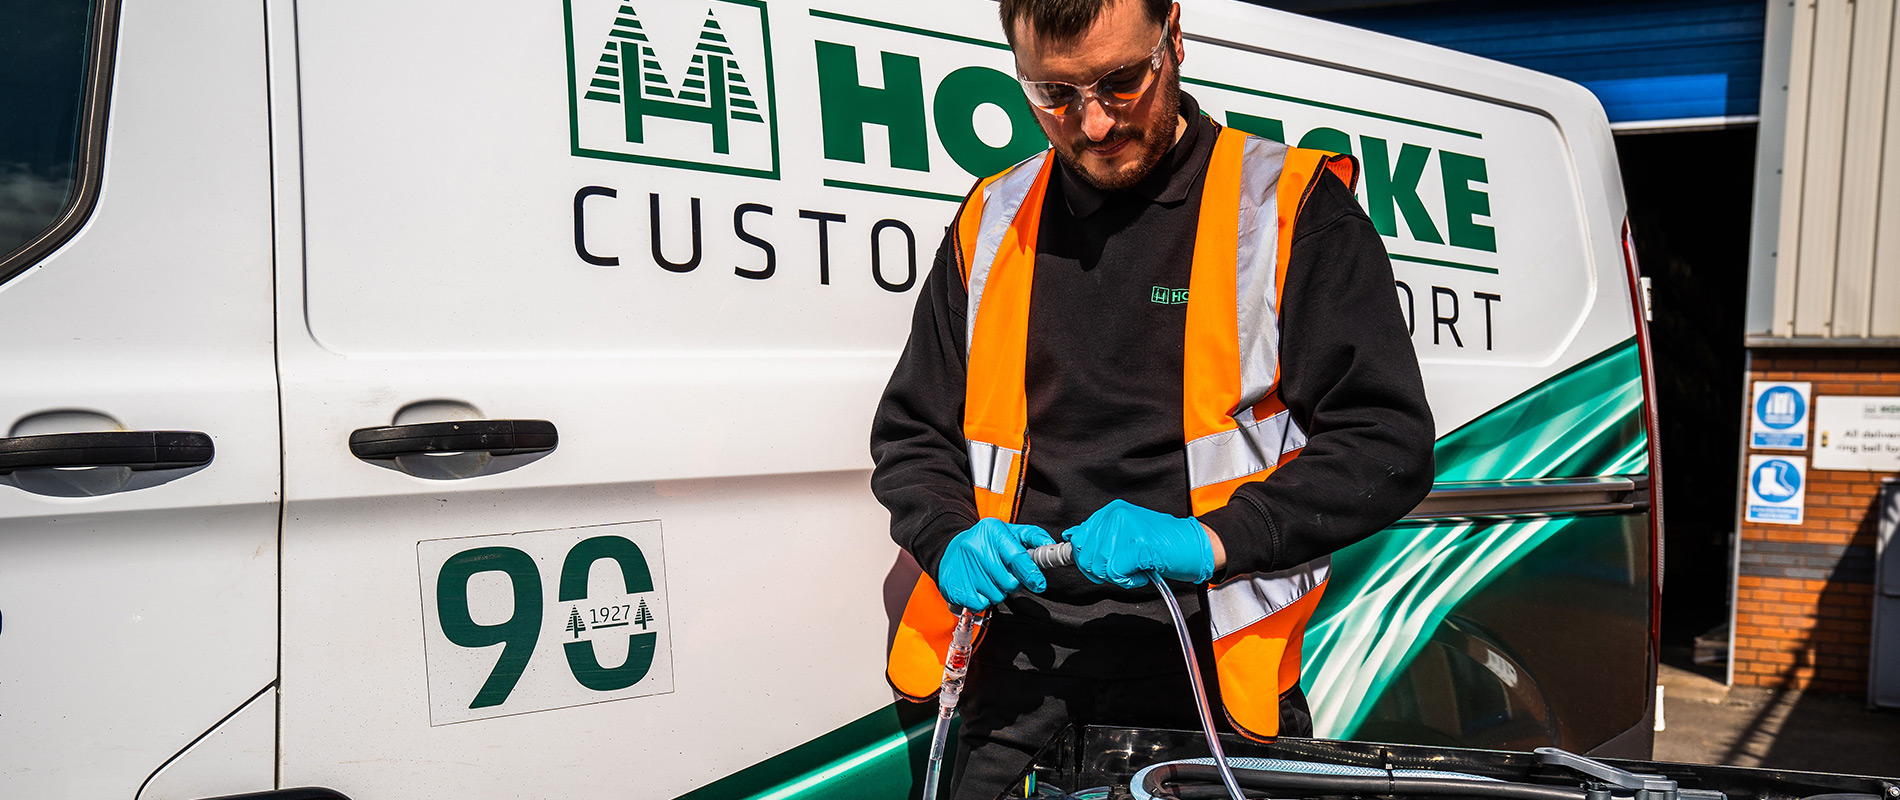 Maintaining production and service in the UK - learn more